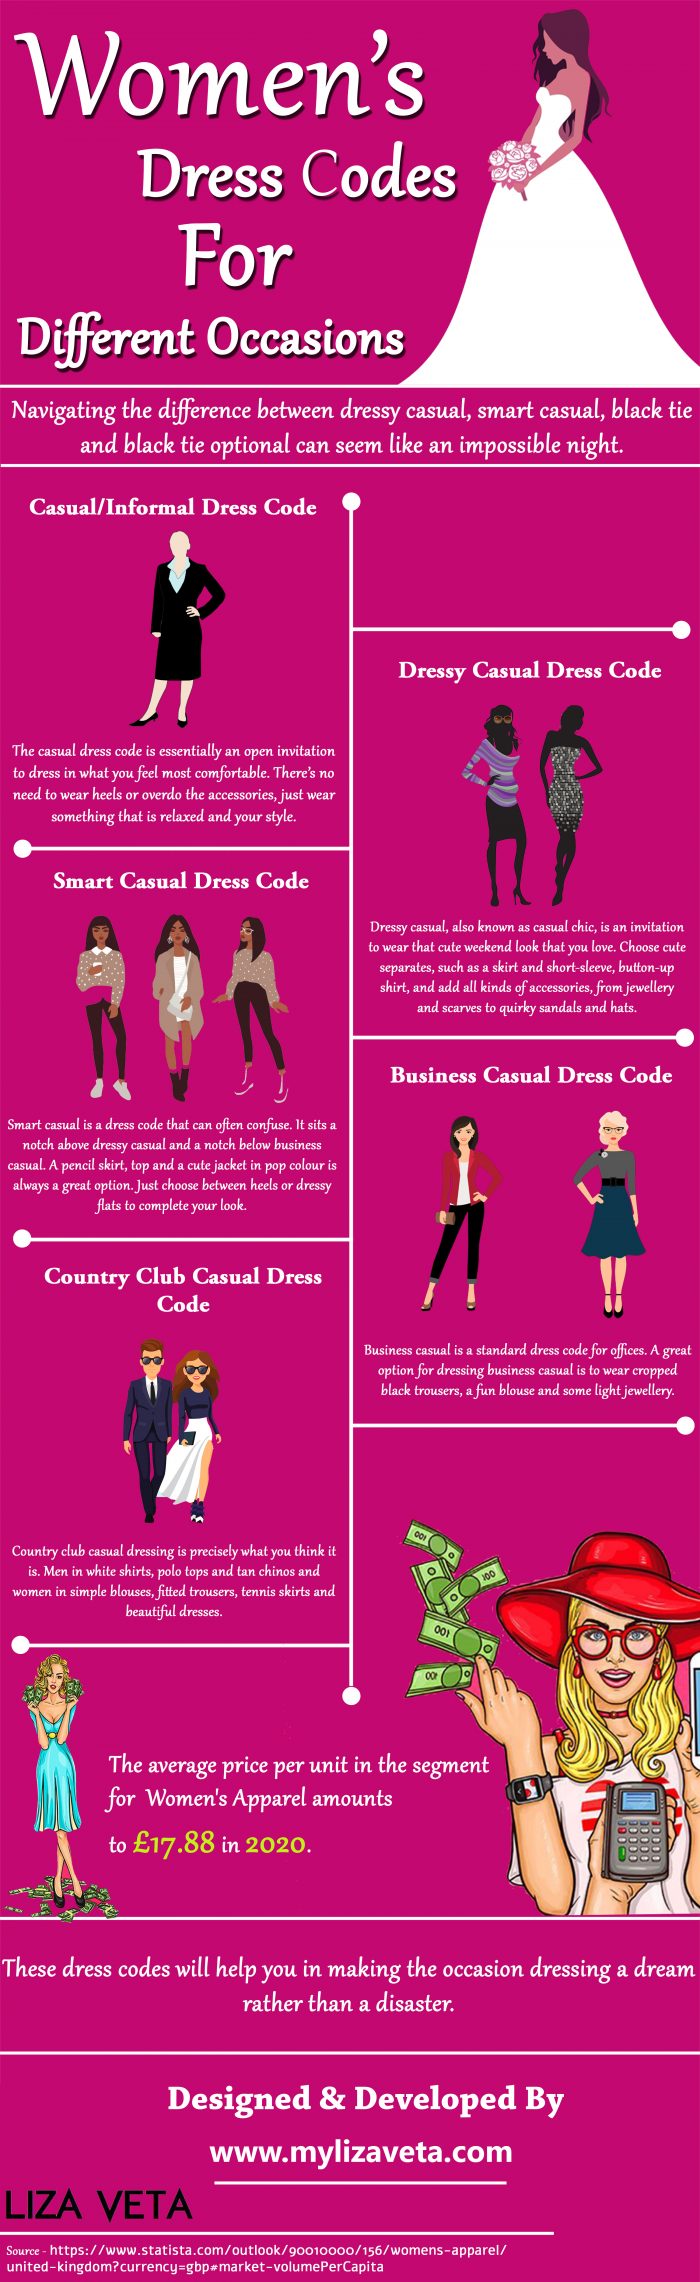 Women’s Dress Codes for different Occasions